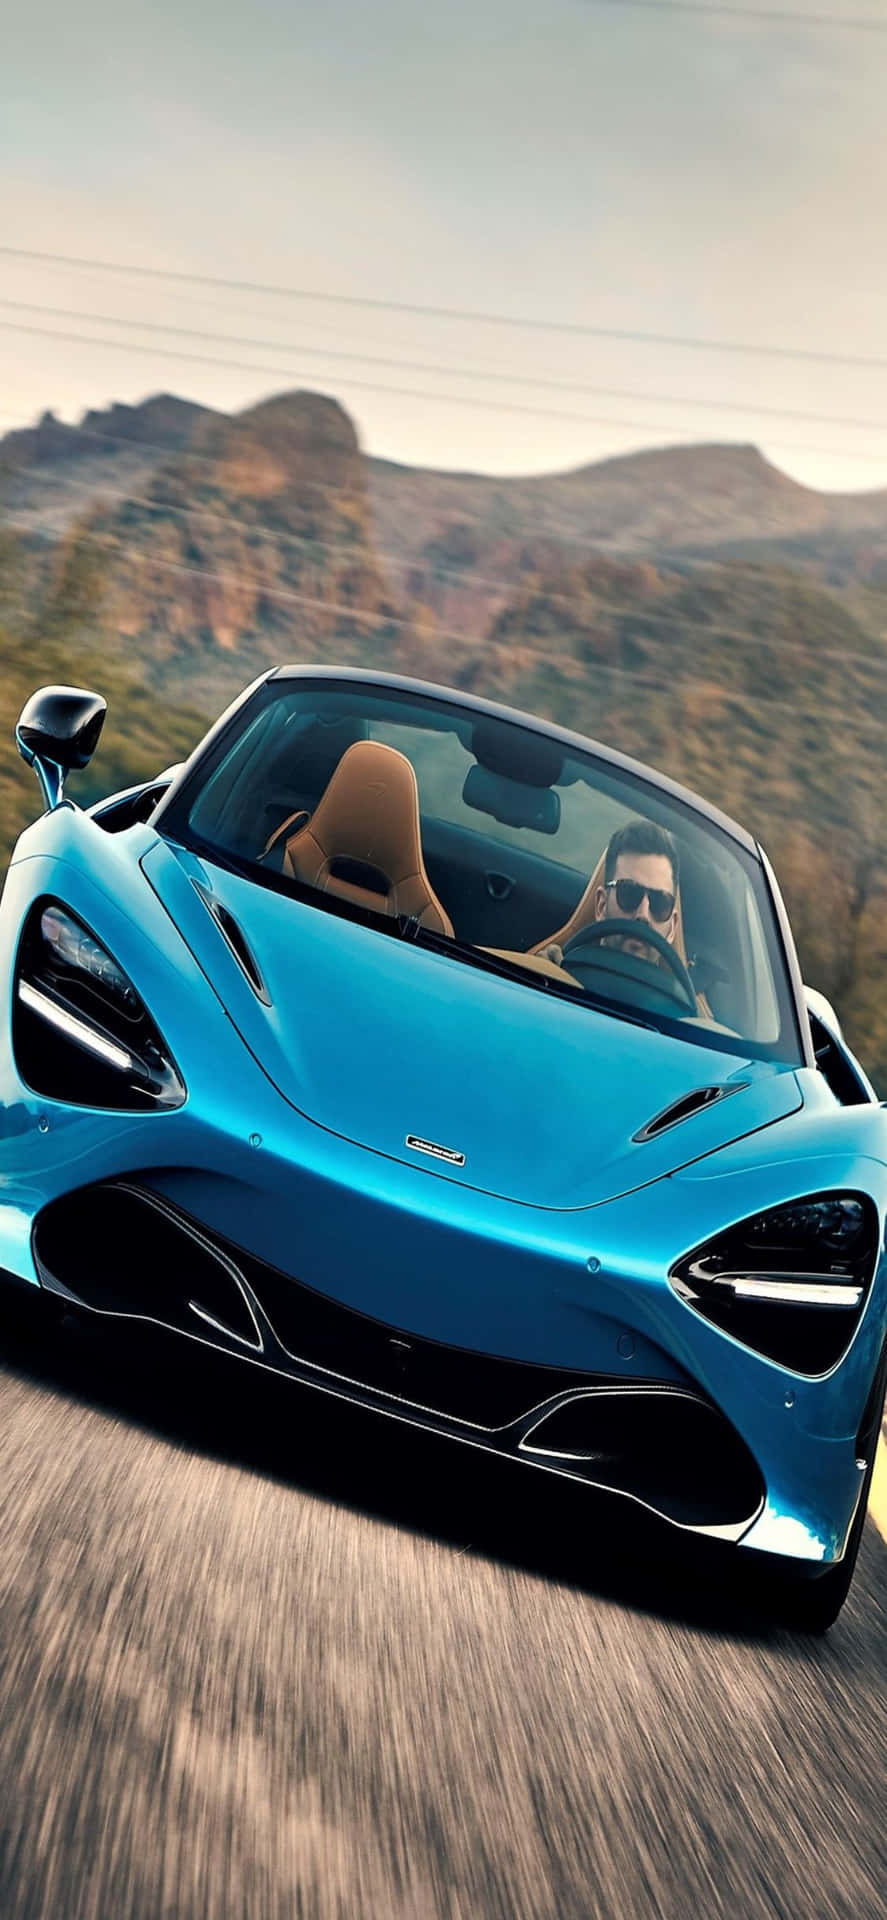 The Iphone X Meets the Iconic Mclaren 720s